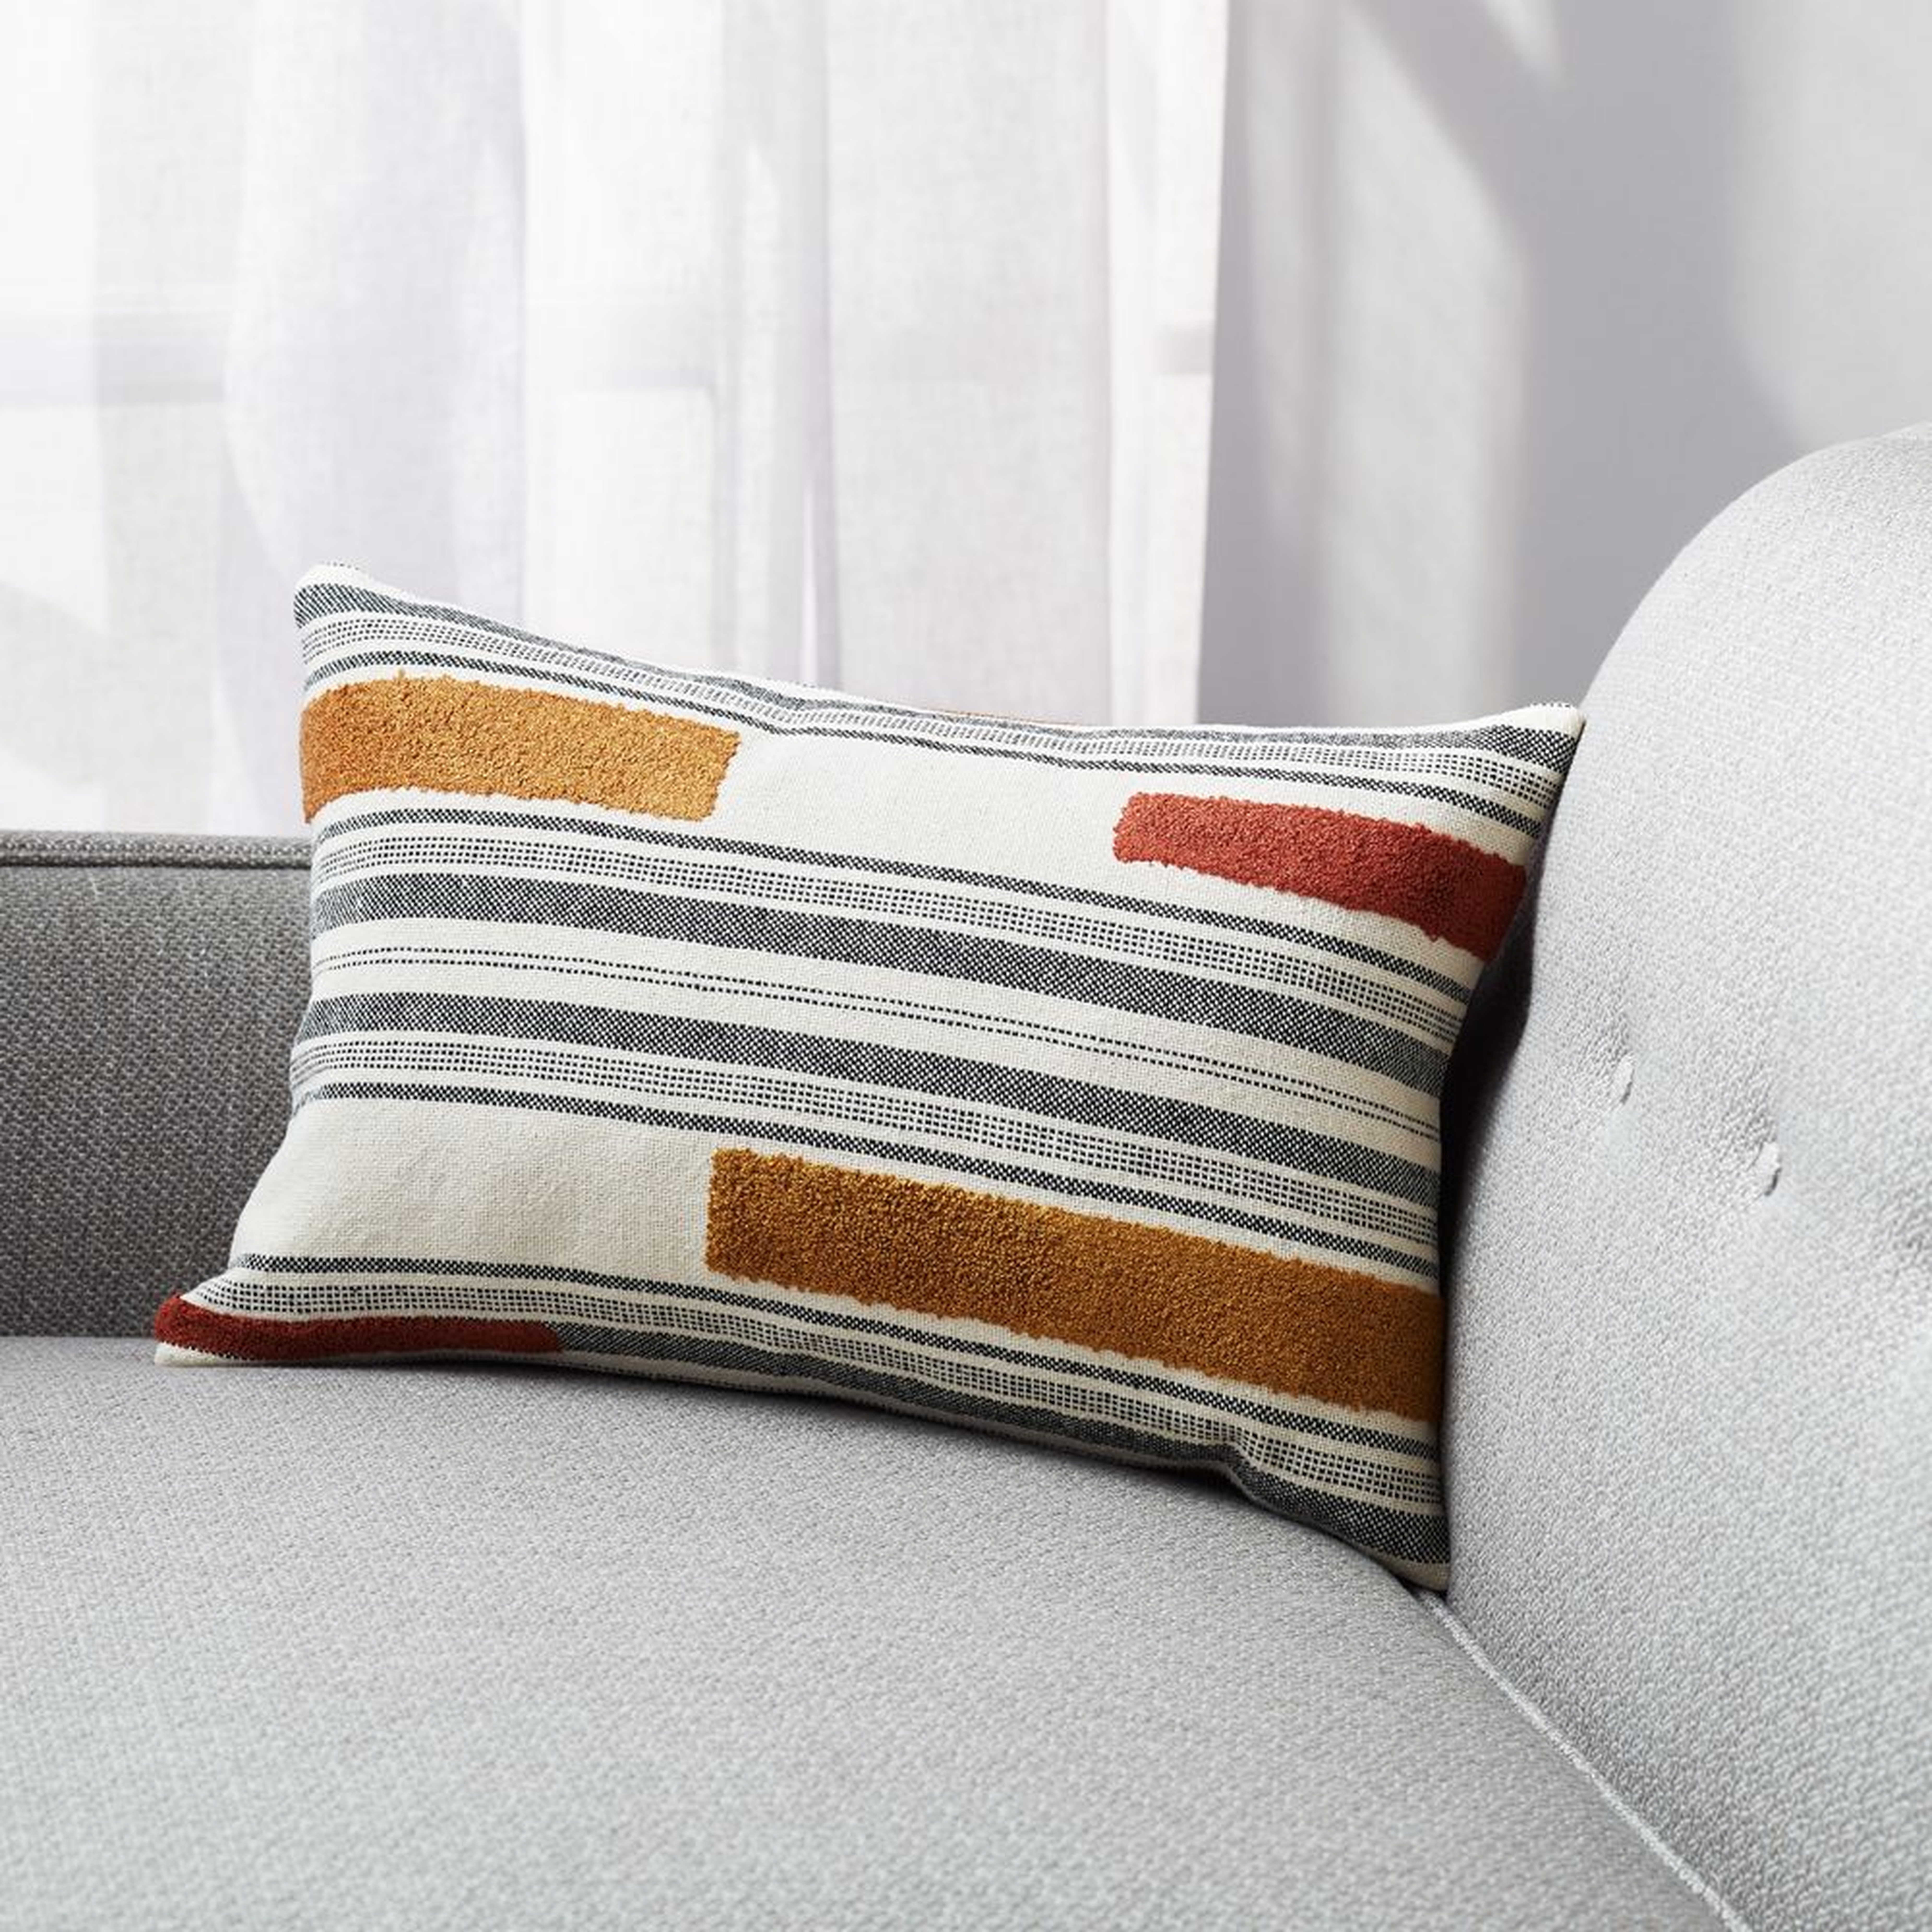 Reims Stripe Pillow with Down-Alternative Insert 18"x12" - Crate and Barrel